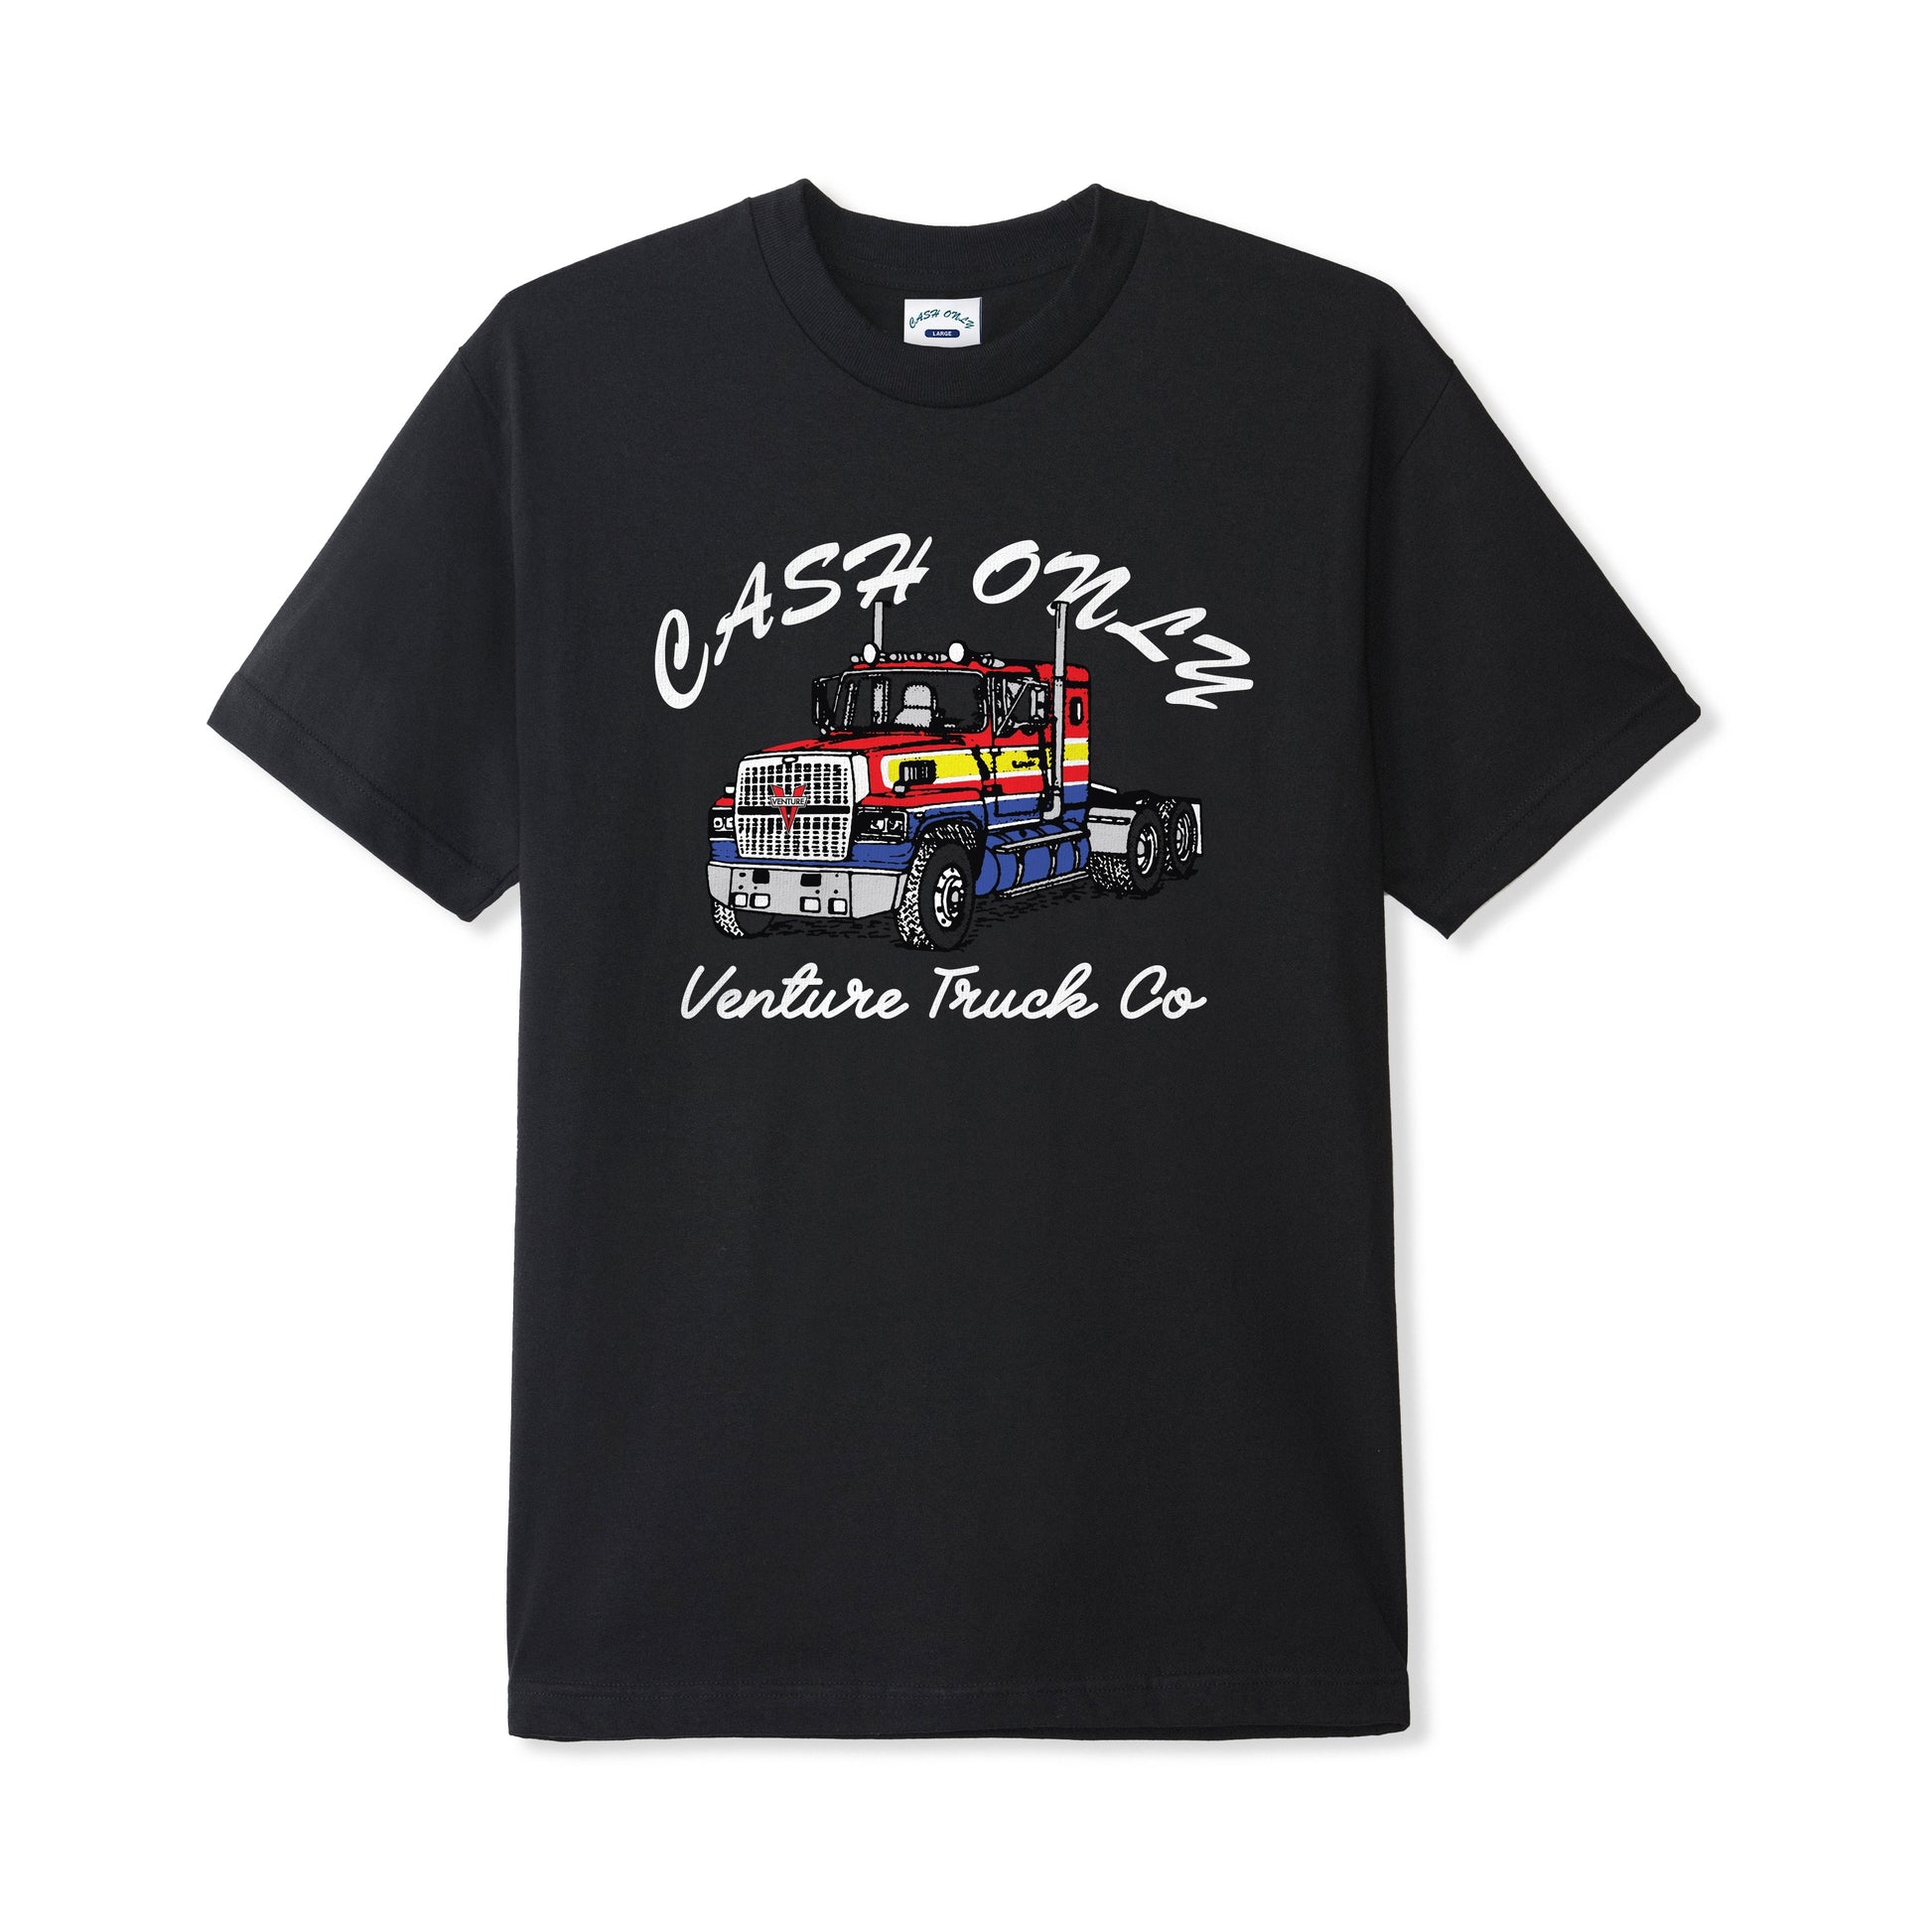 Black T-Shirt with big screen printed graphic of a truck, by a collaboration of the brands Cash Only and Venture Trucks